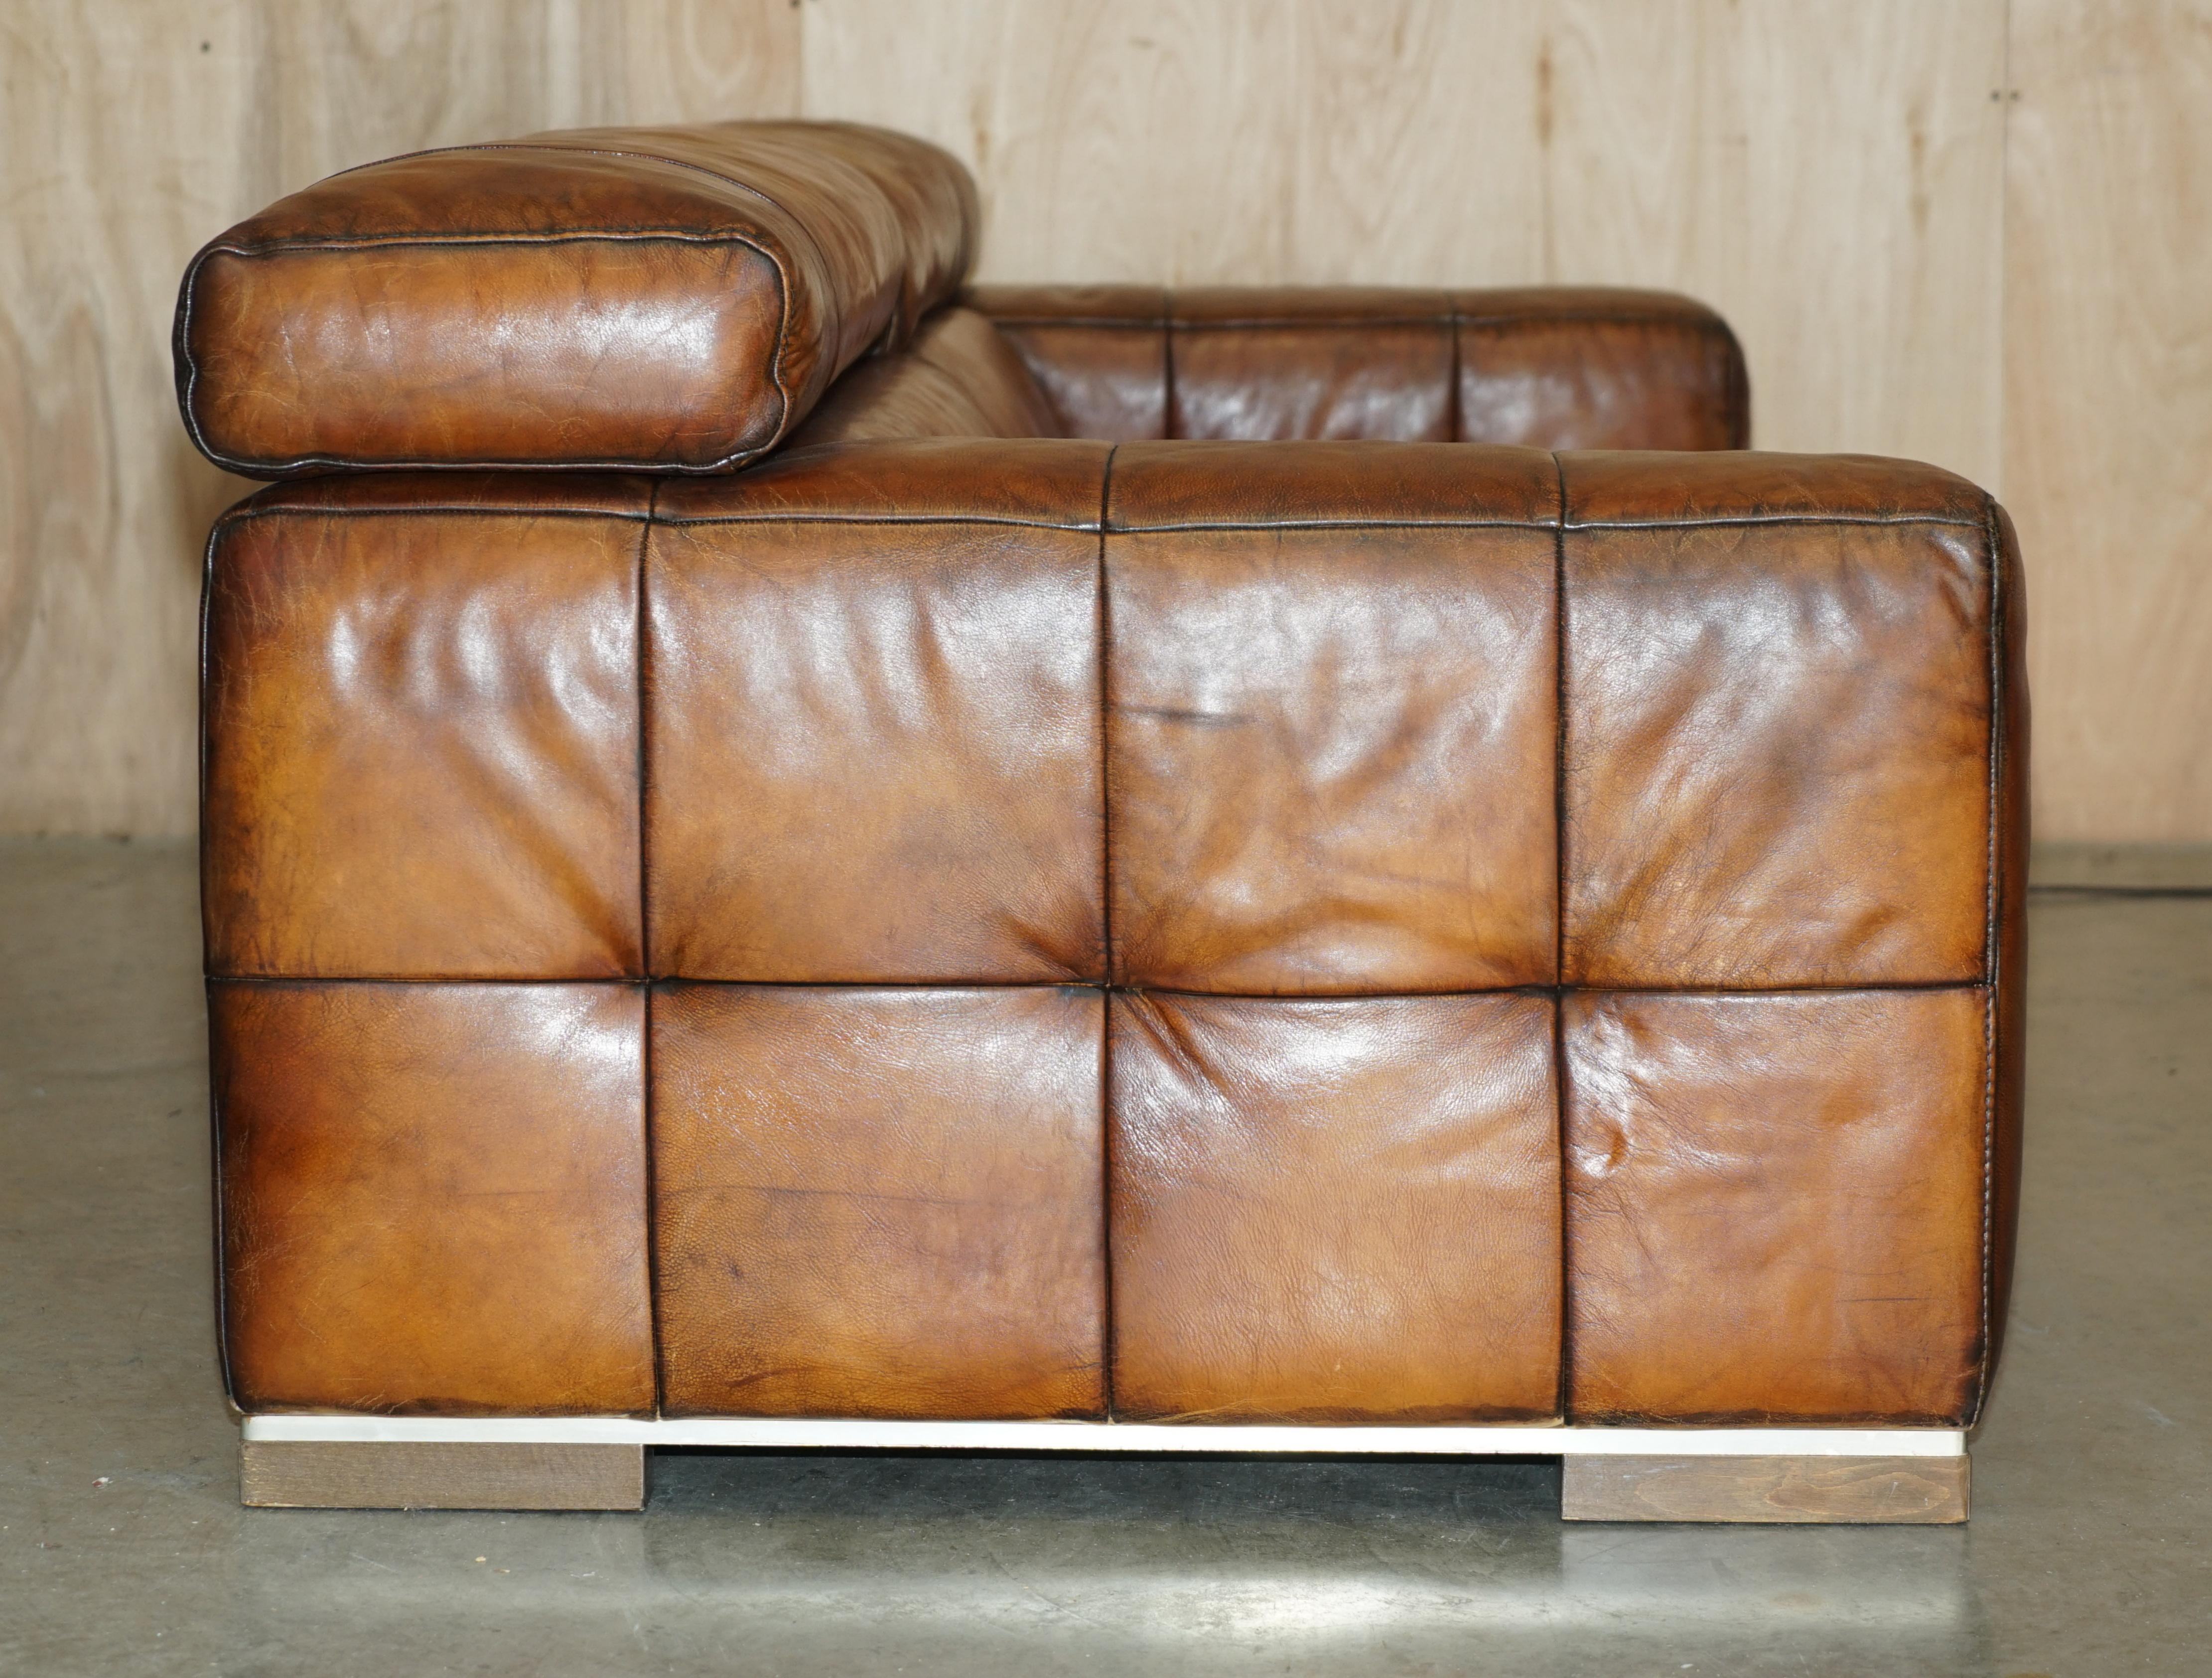 Natuzzi Roma Cigar Brown Leather Sofa Electric Raising Headrest Part of a Suite For Sale 4